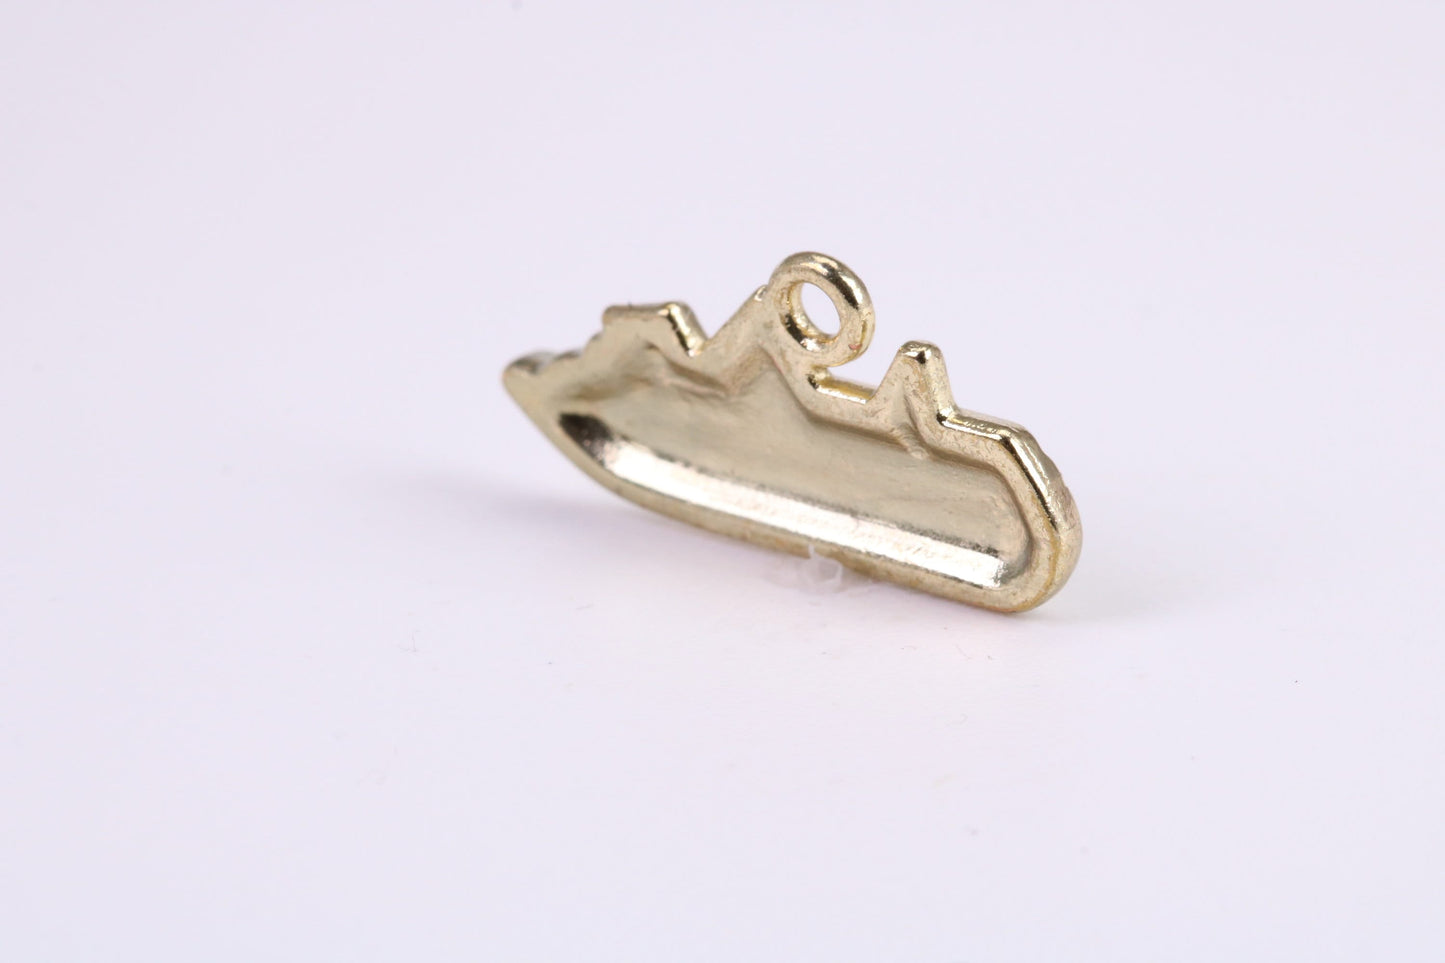 Cruise Ship Charm, Traditional Charm, Made from Solid Yellow Gold, British Hallmarked, Complete with Attachment Link